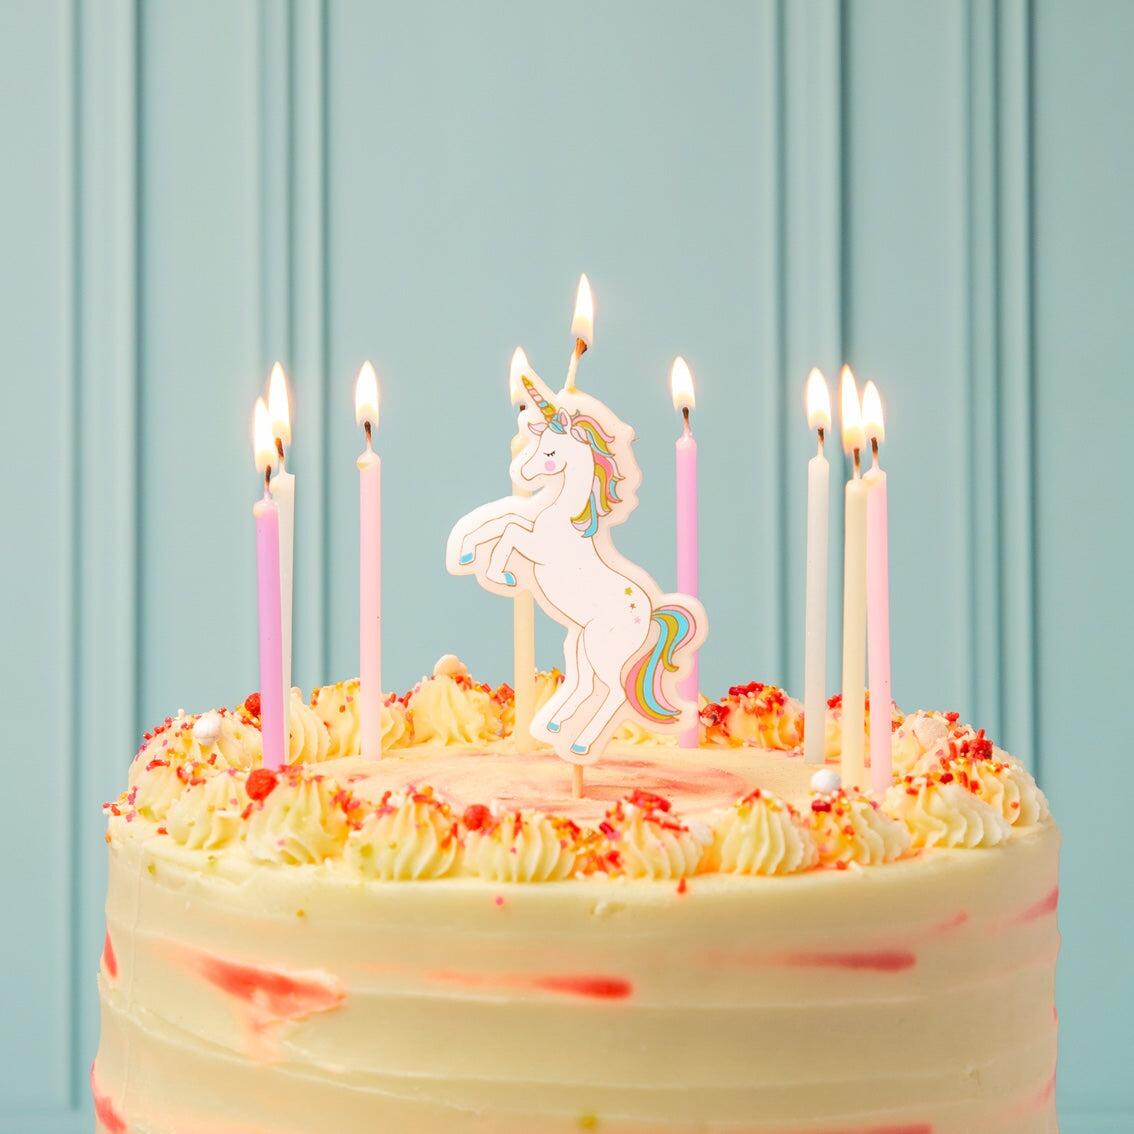 Tall 10cm pastel party candles